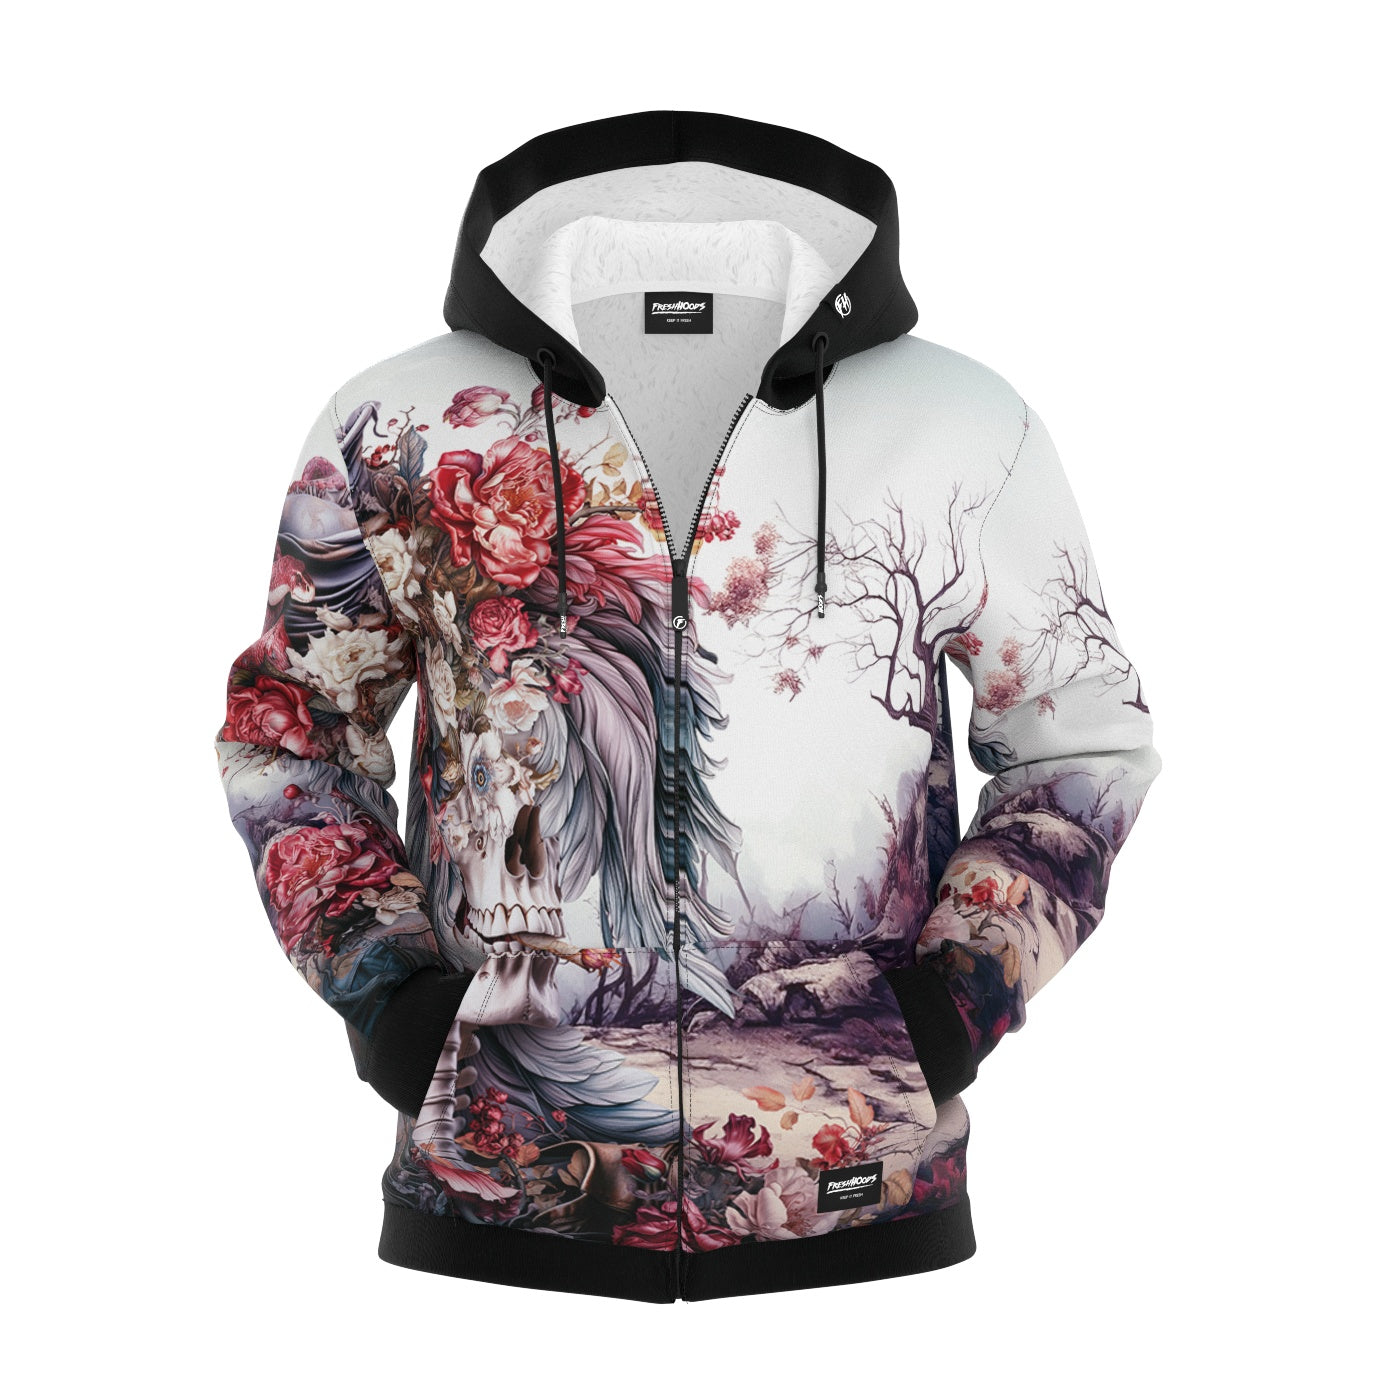 A Surreal Farewell Zip Up Hoodie